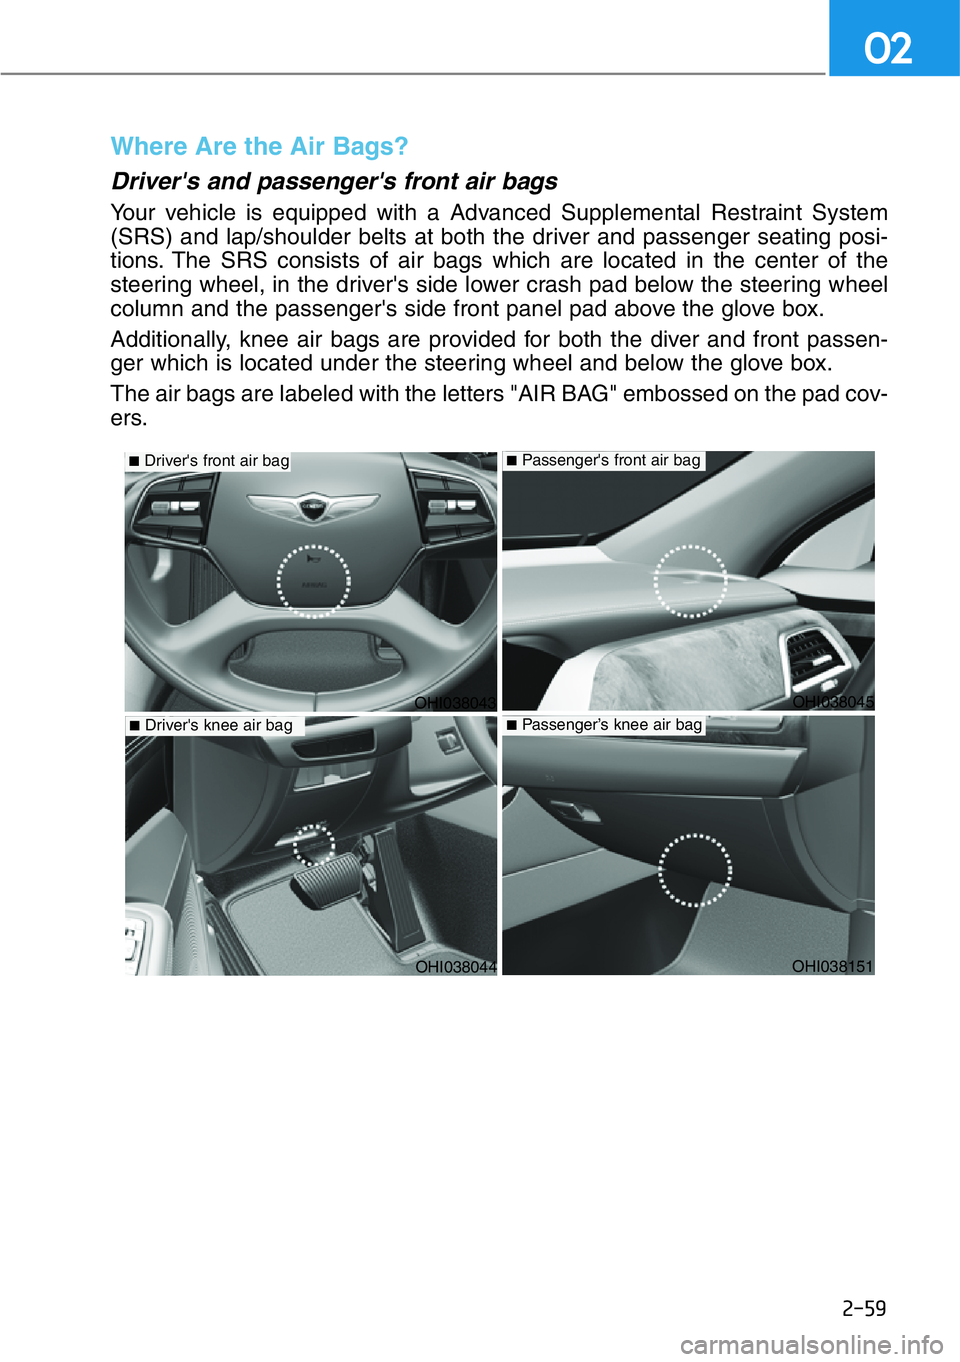 GENESIS G90 2021  Owners Manual 2-59
02
Where Are the Air Bags? 
Driver's and passenger's front air bags 
Your vehicle is equipped with a Advanced Supplemental Restraint System
(SRS) and lap/shoulder belts at both the driver